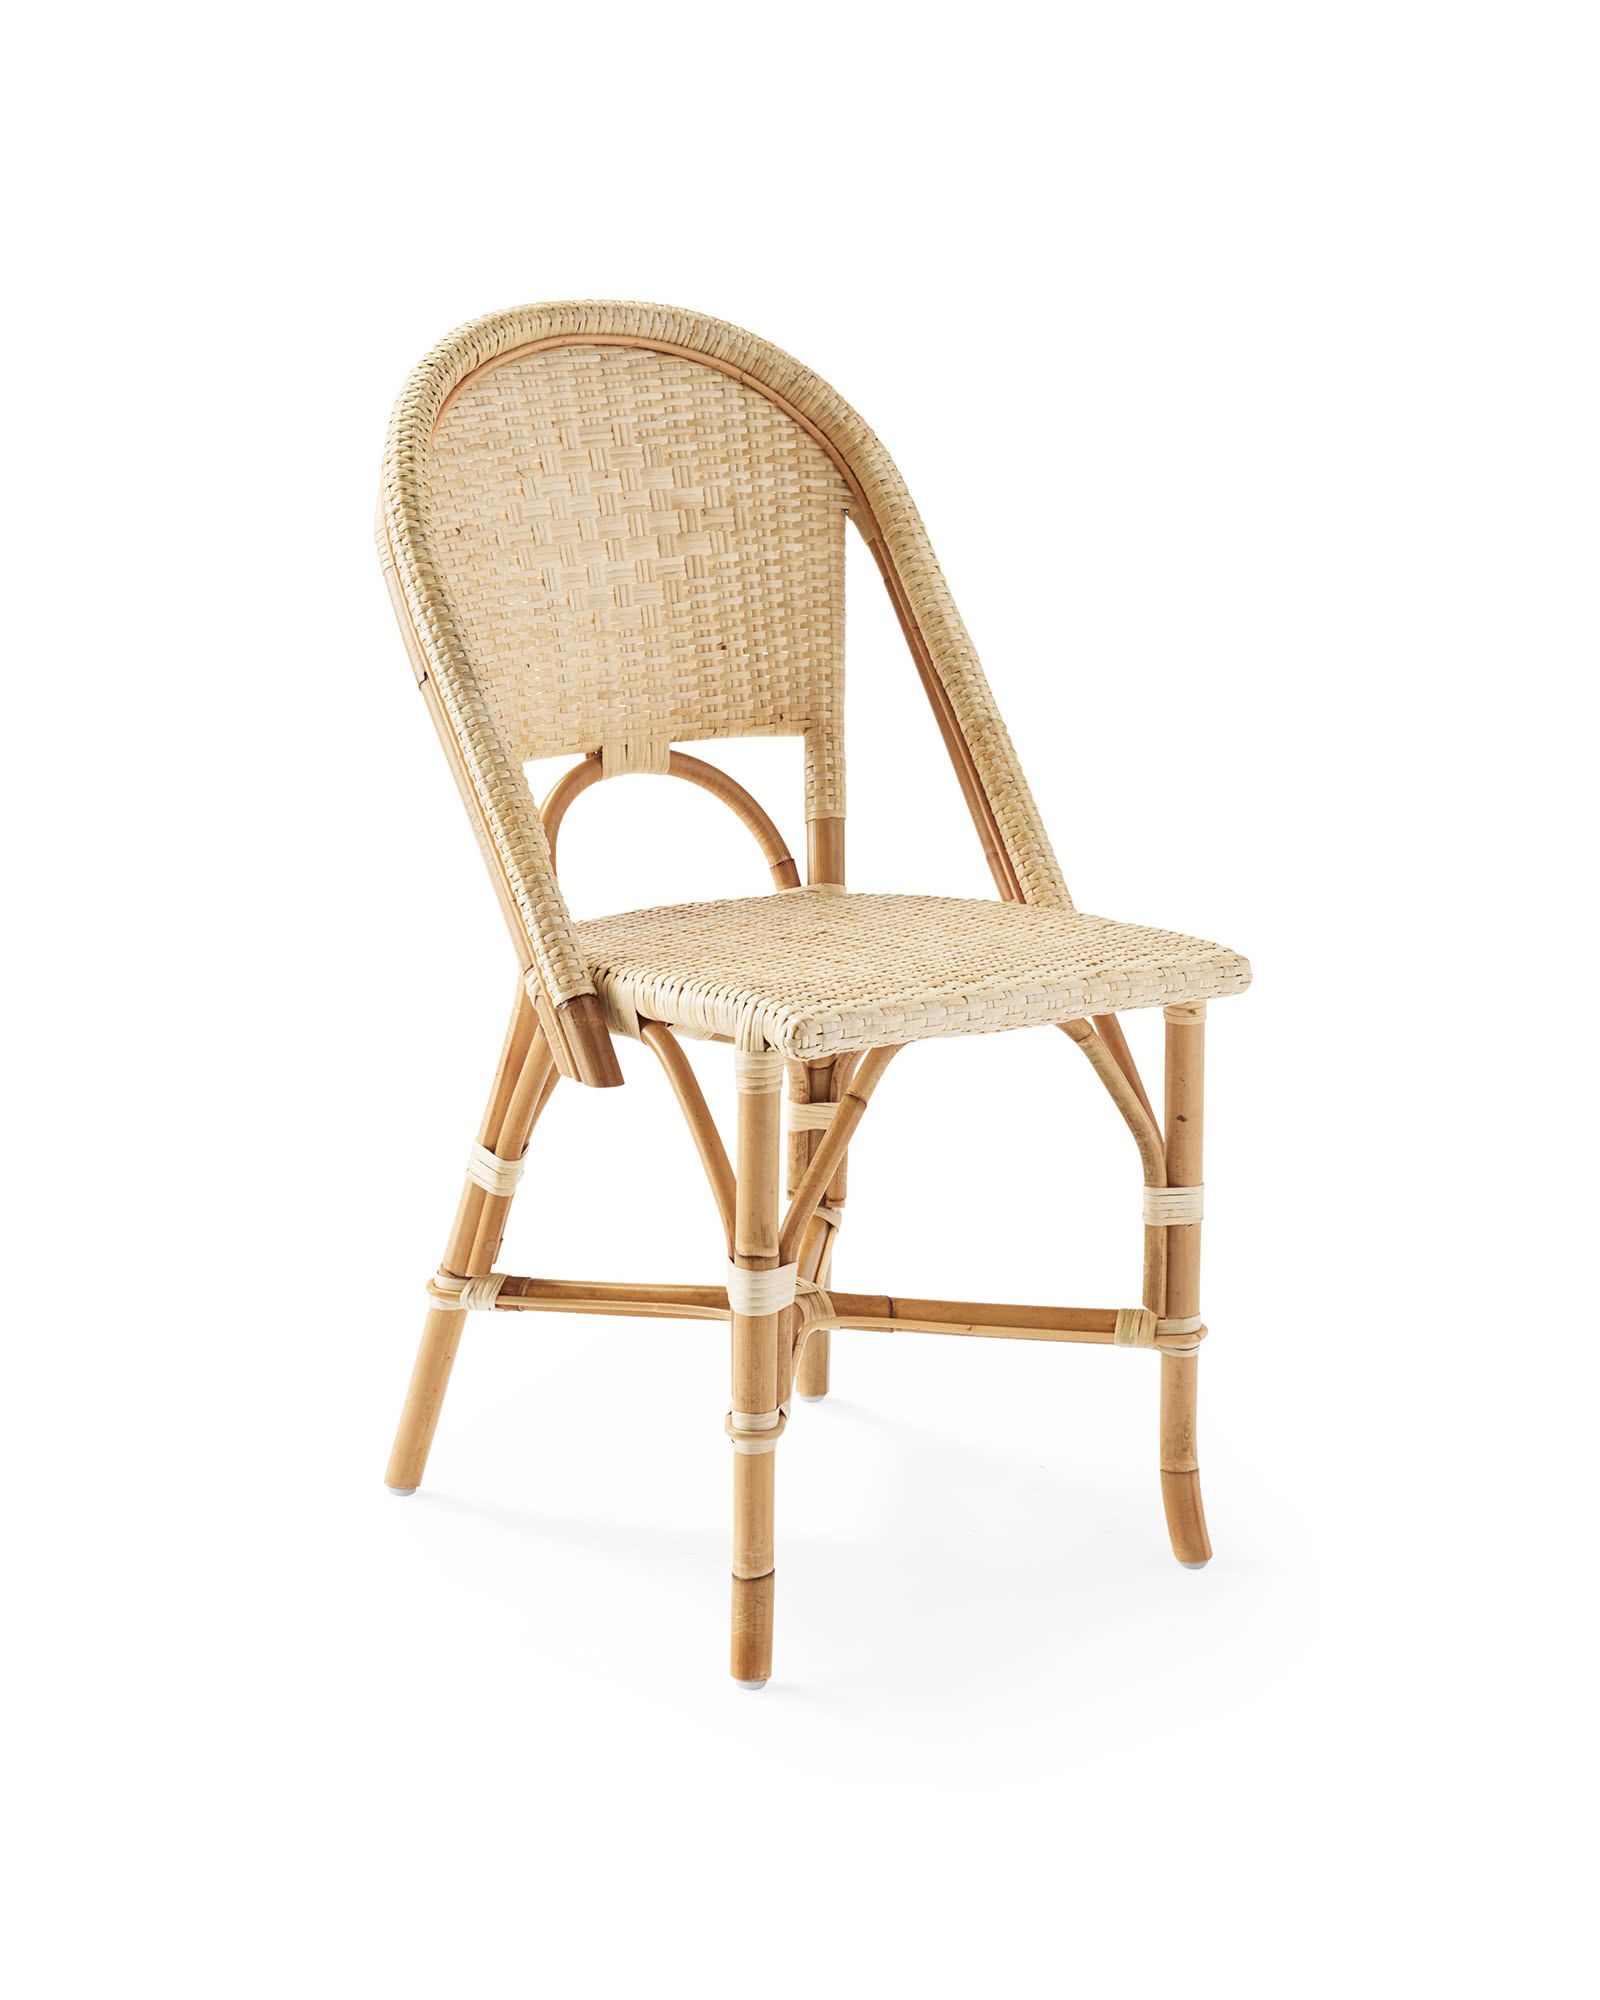 Sunwashed Riviera Side Chair
        CH45-09 | Serena and Lily